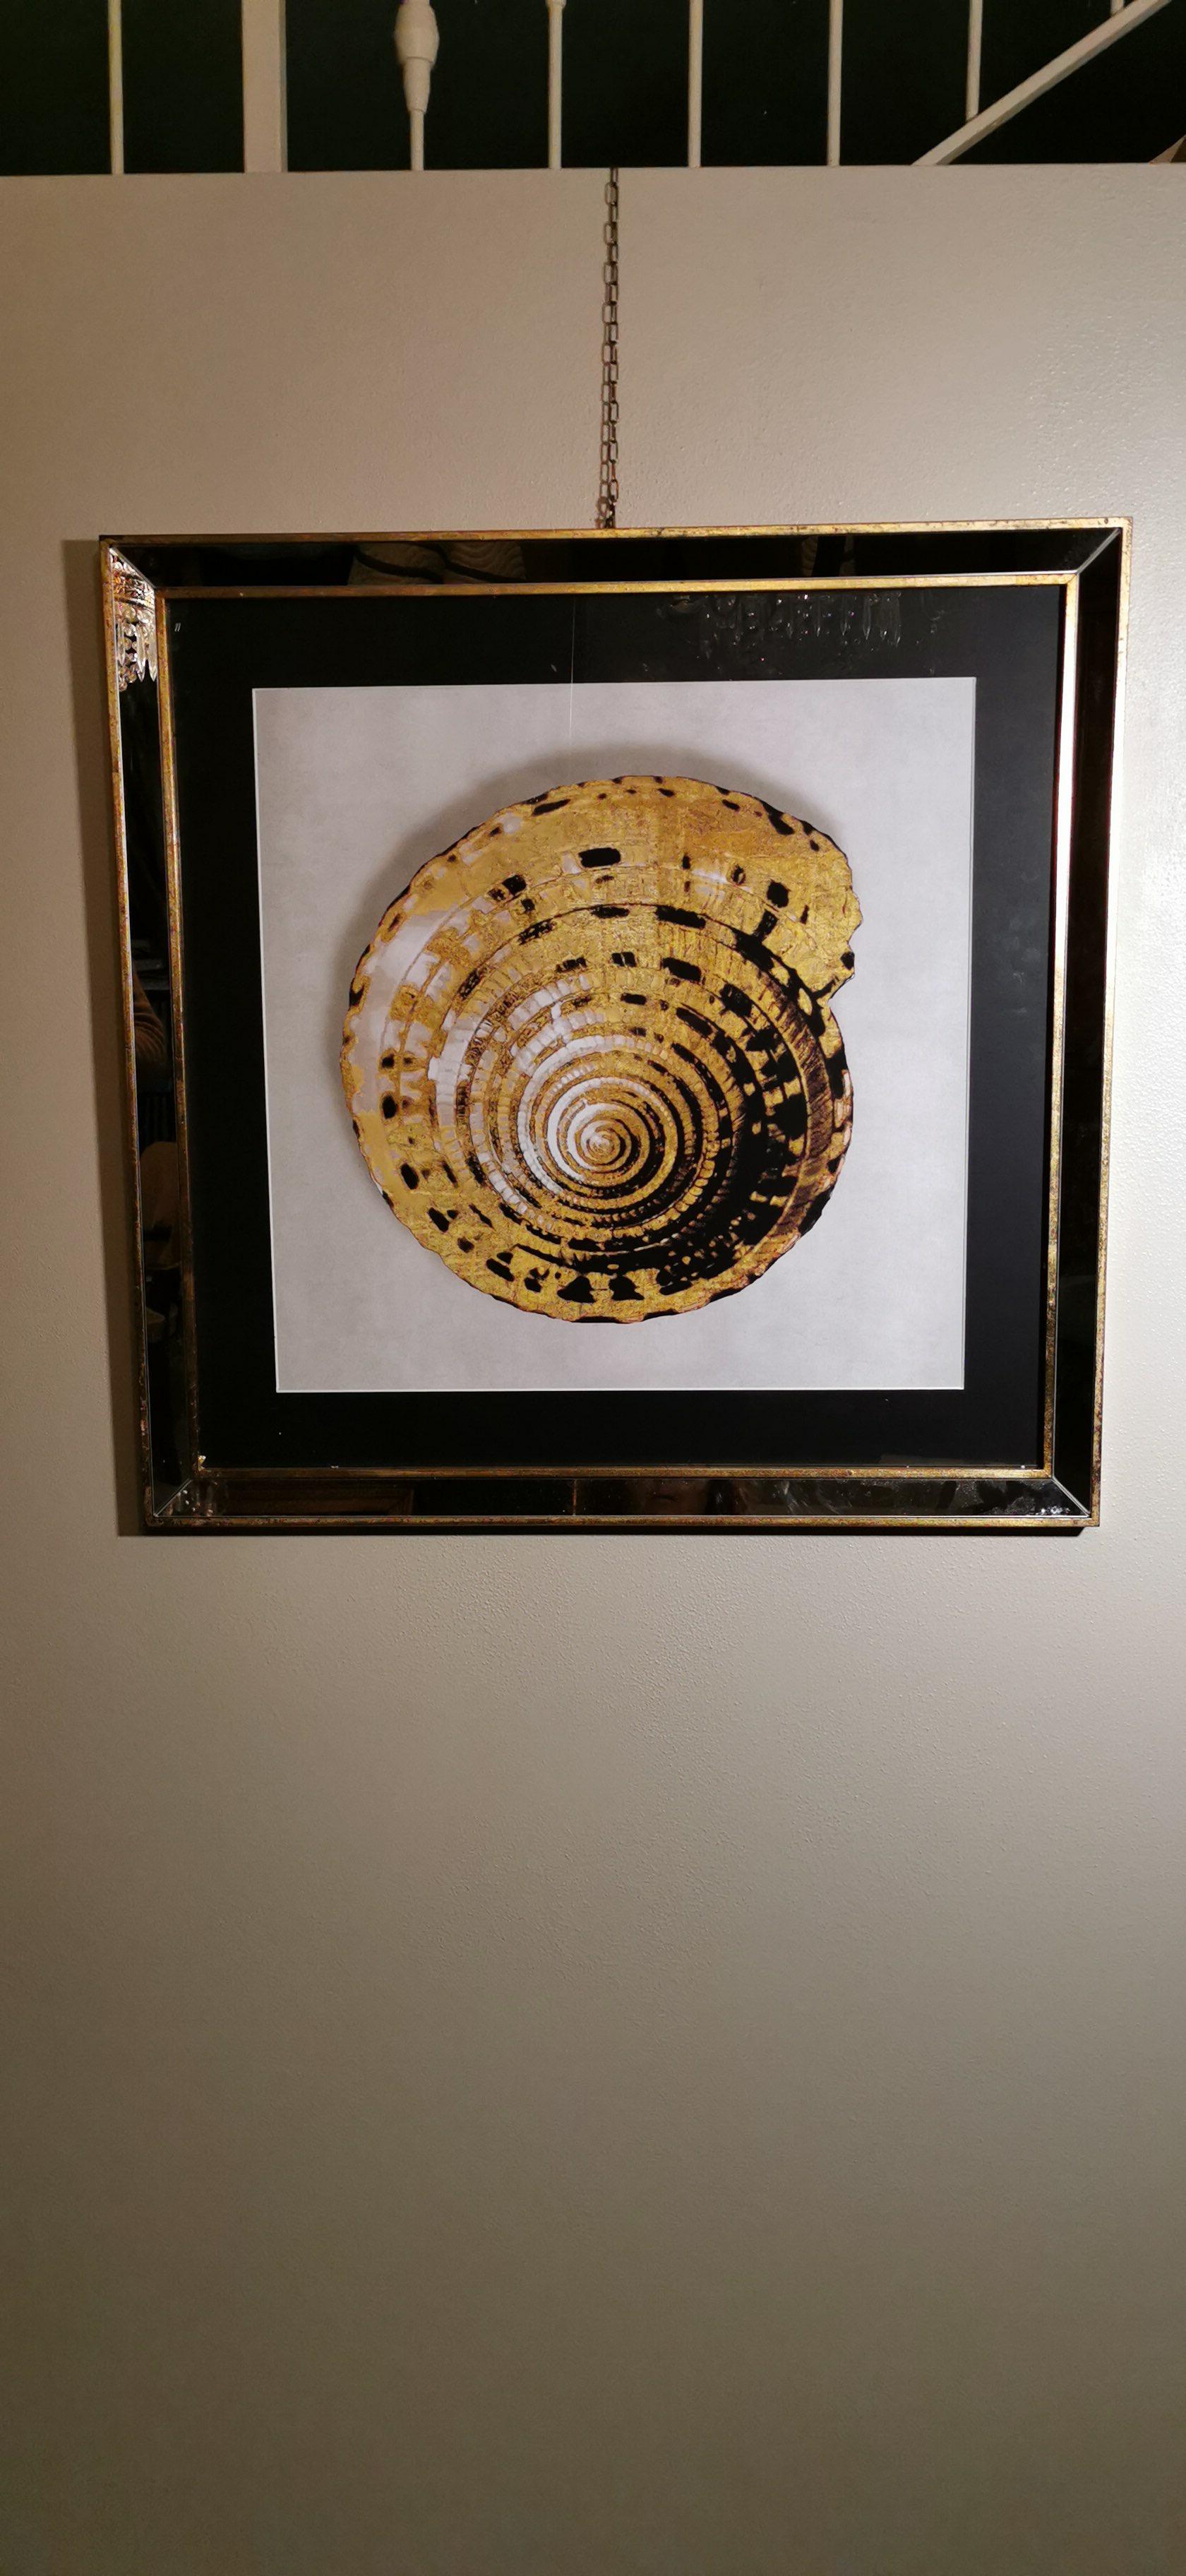 Elegant hand-colored print representing a golden shell. The handcrafted frame is in gilded wood with mirror inserts. This print is made with a special technique called giclée. The giclée printing technique is an individual high definition